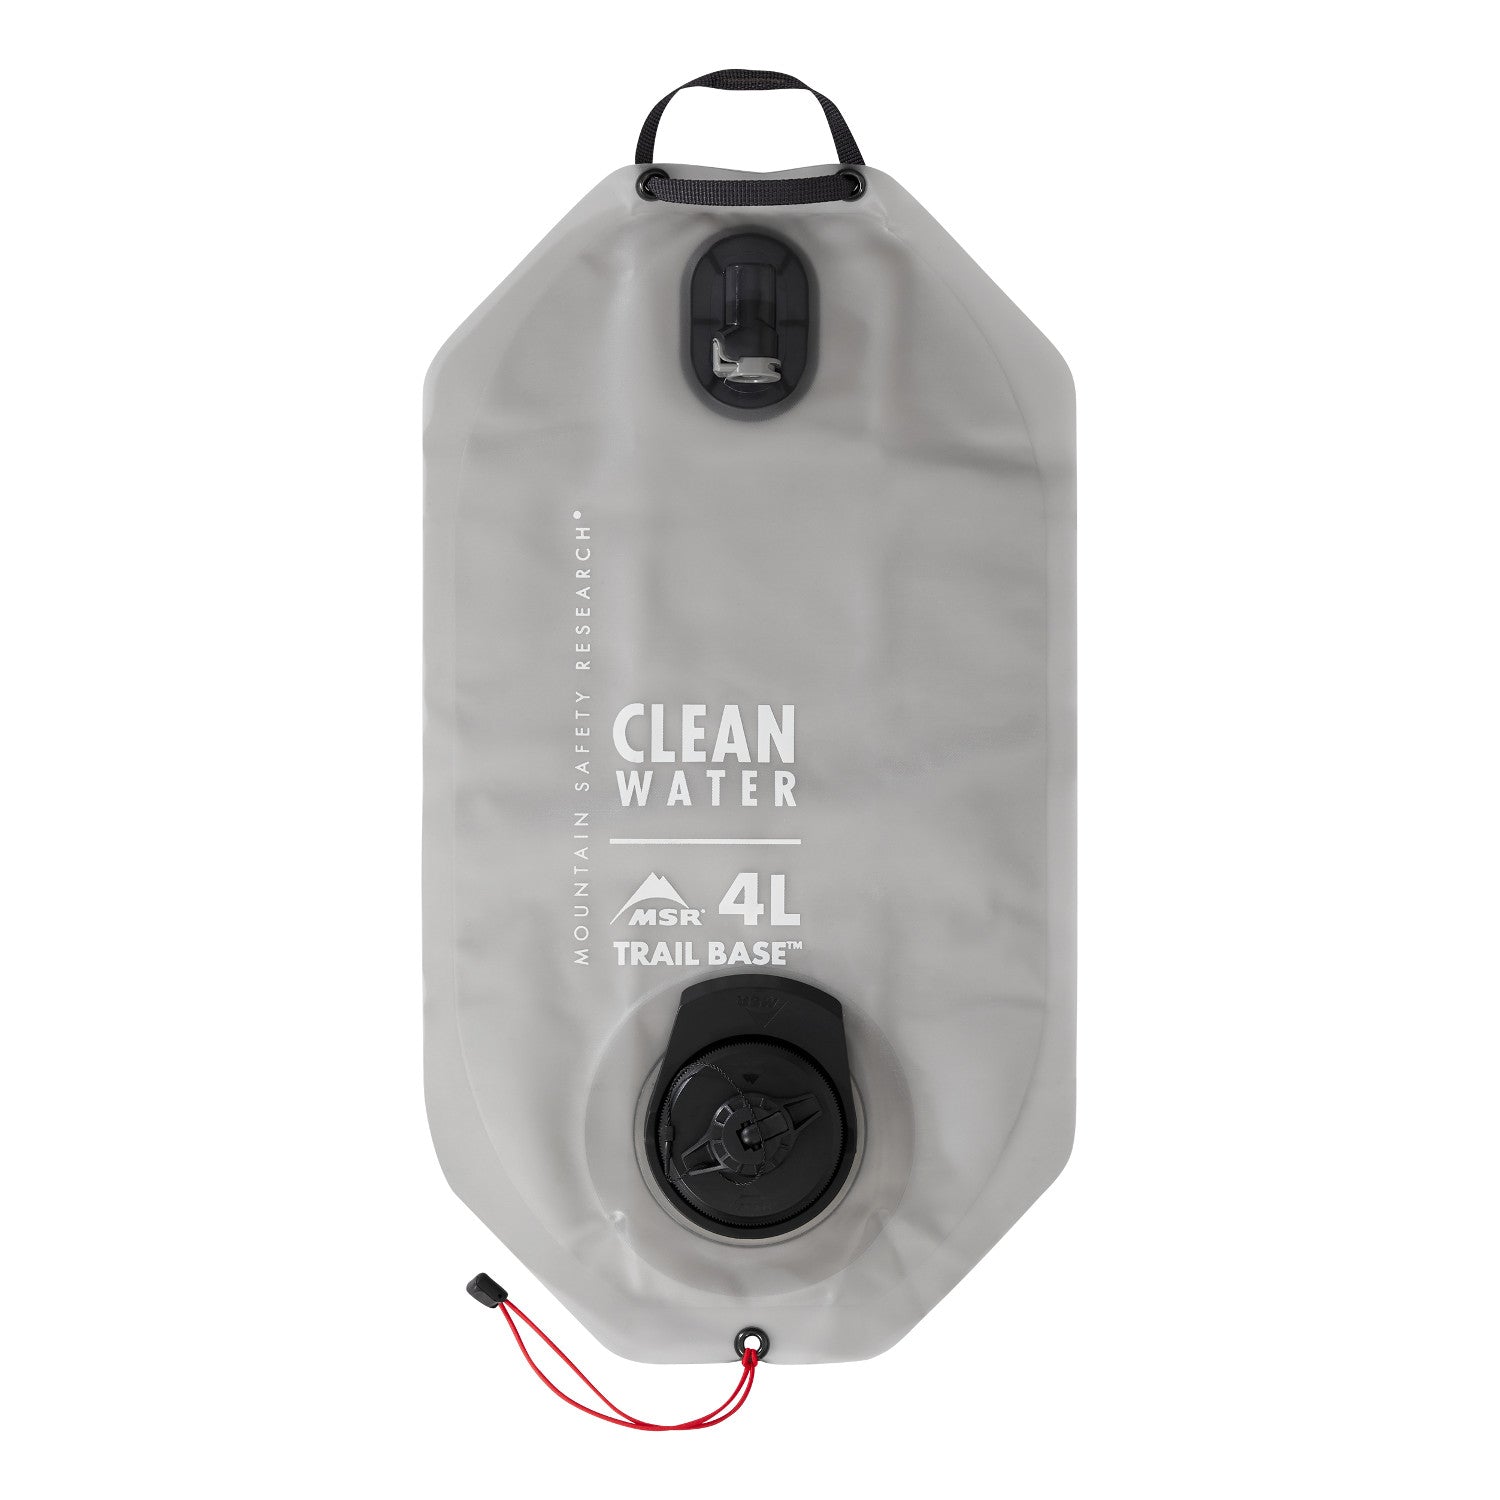 MSR Trail Base Water Filter 4L in Grey colour shown hanging